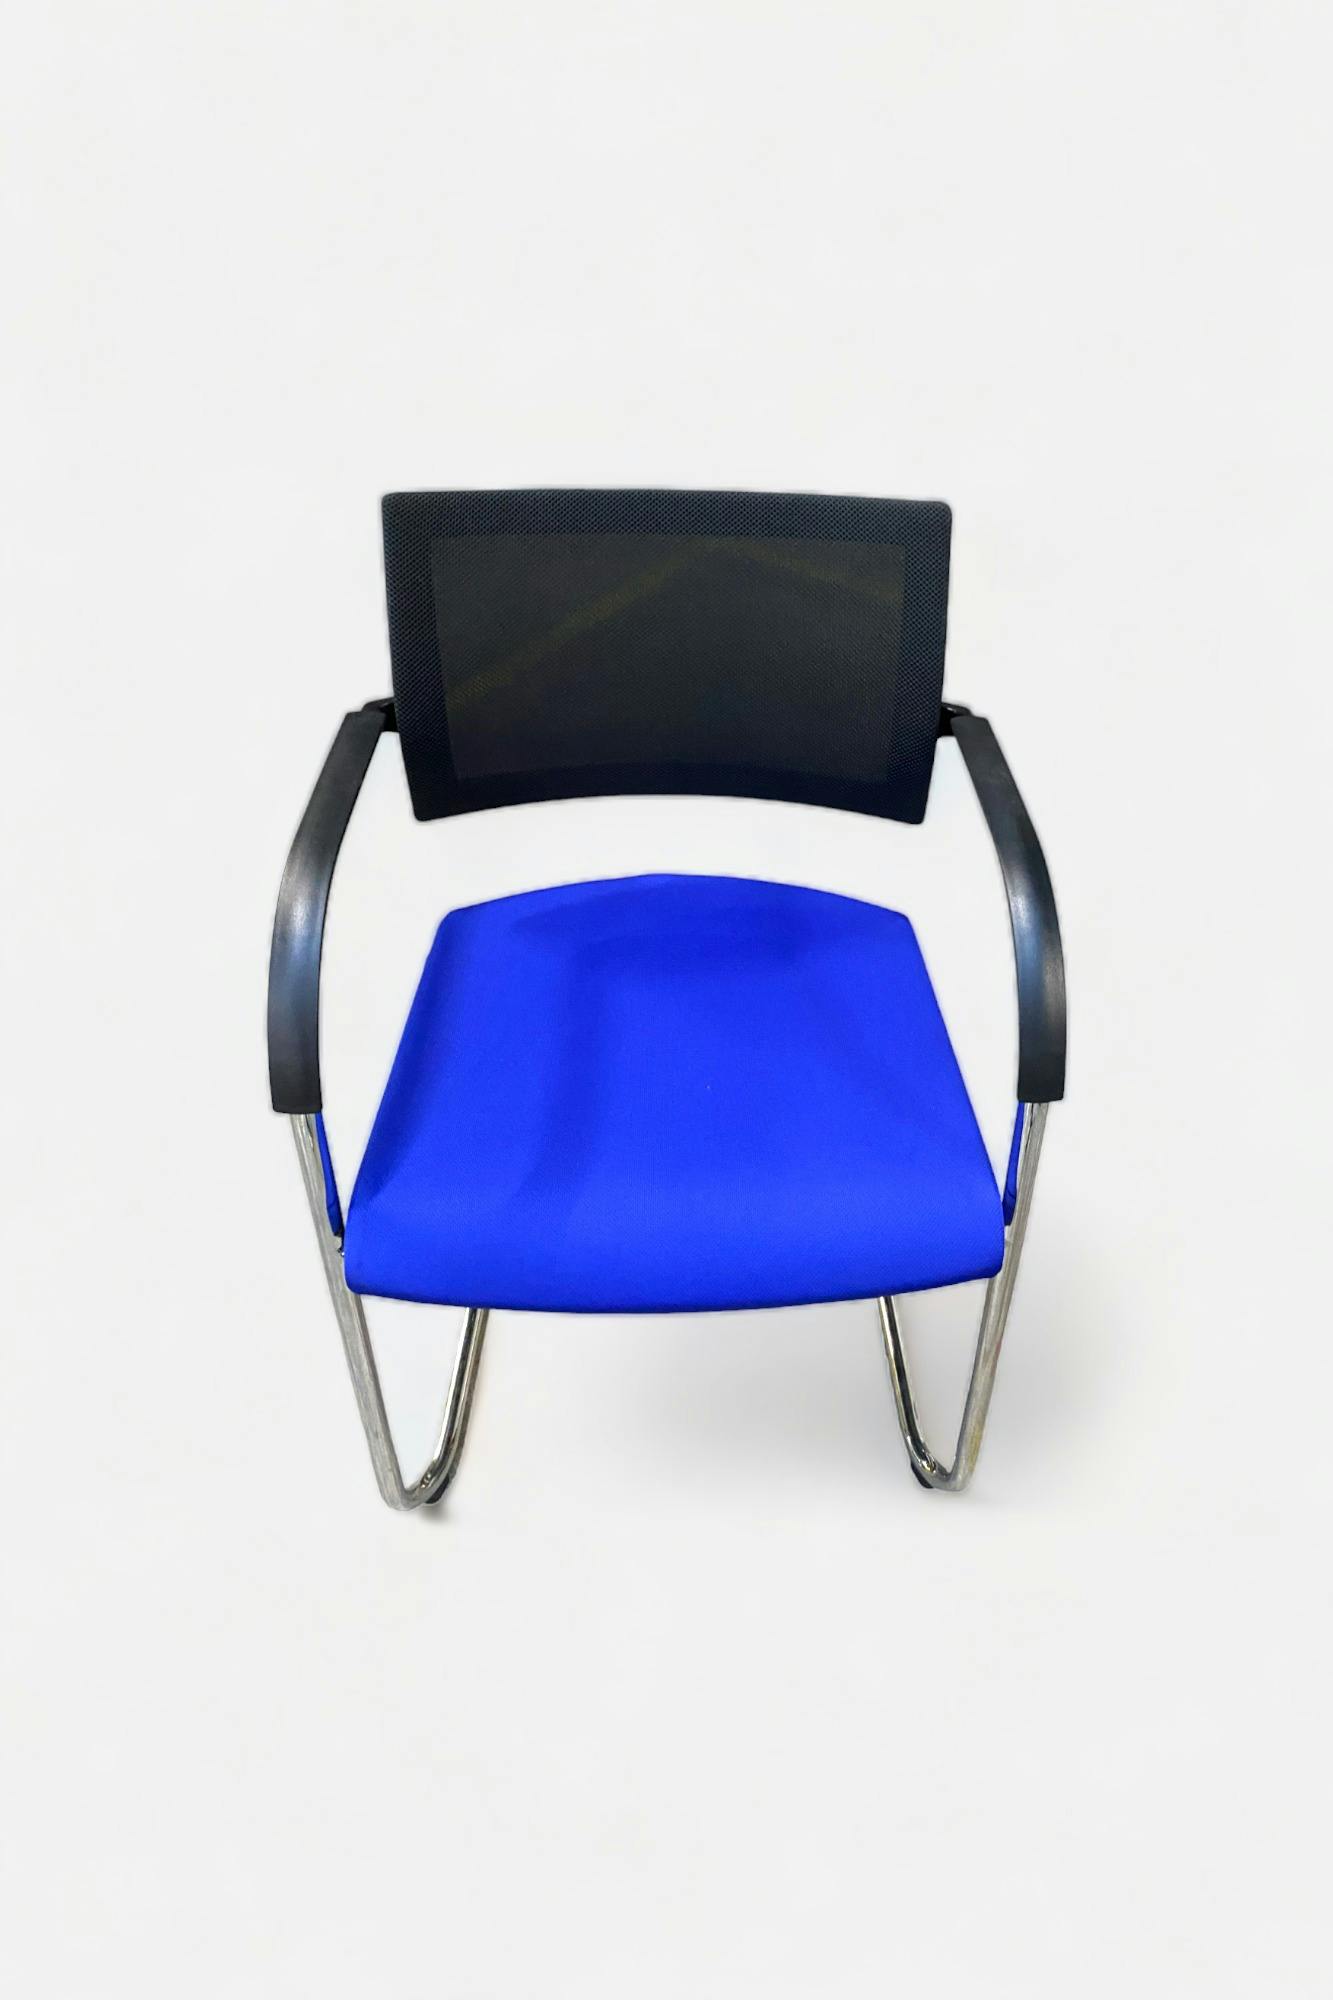 BENE Blue meeting chair - Relieve Furniture